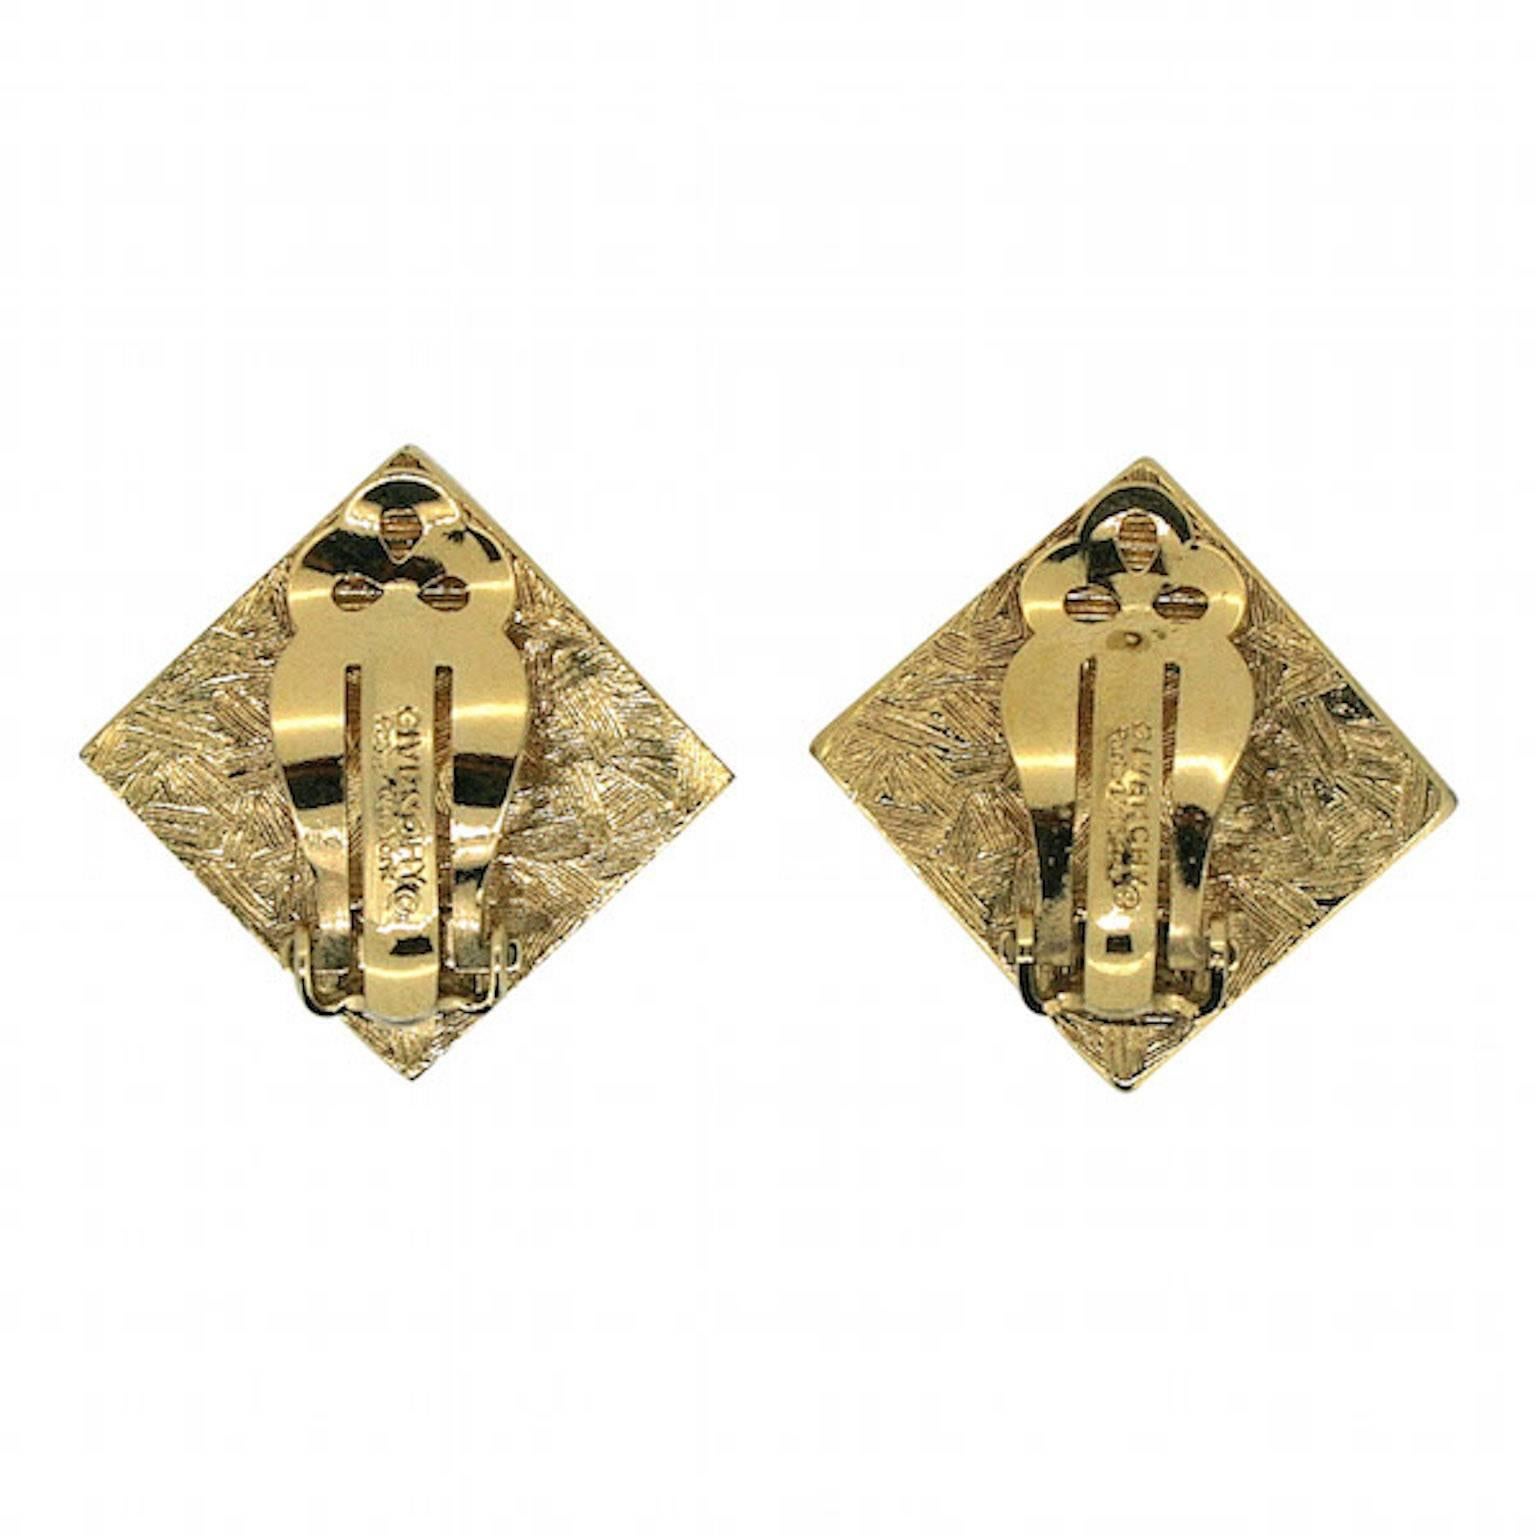 Beautifully crafted and colourful, these earrings by Givenchy. They date from the 1980s and are clip on.
Condition Report:
Excellent

The Details...
These gold tone square shaped earrings are set with square cut rhinestones of various shades of